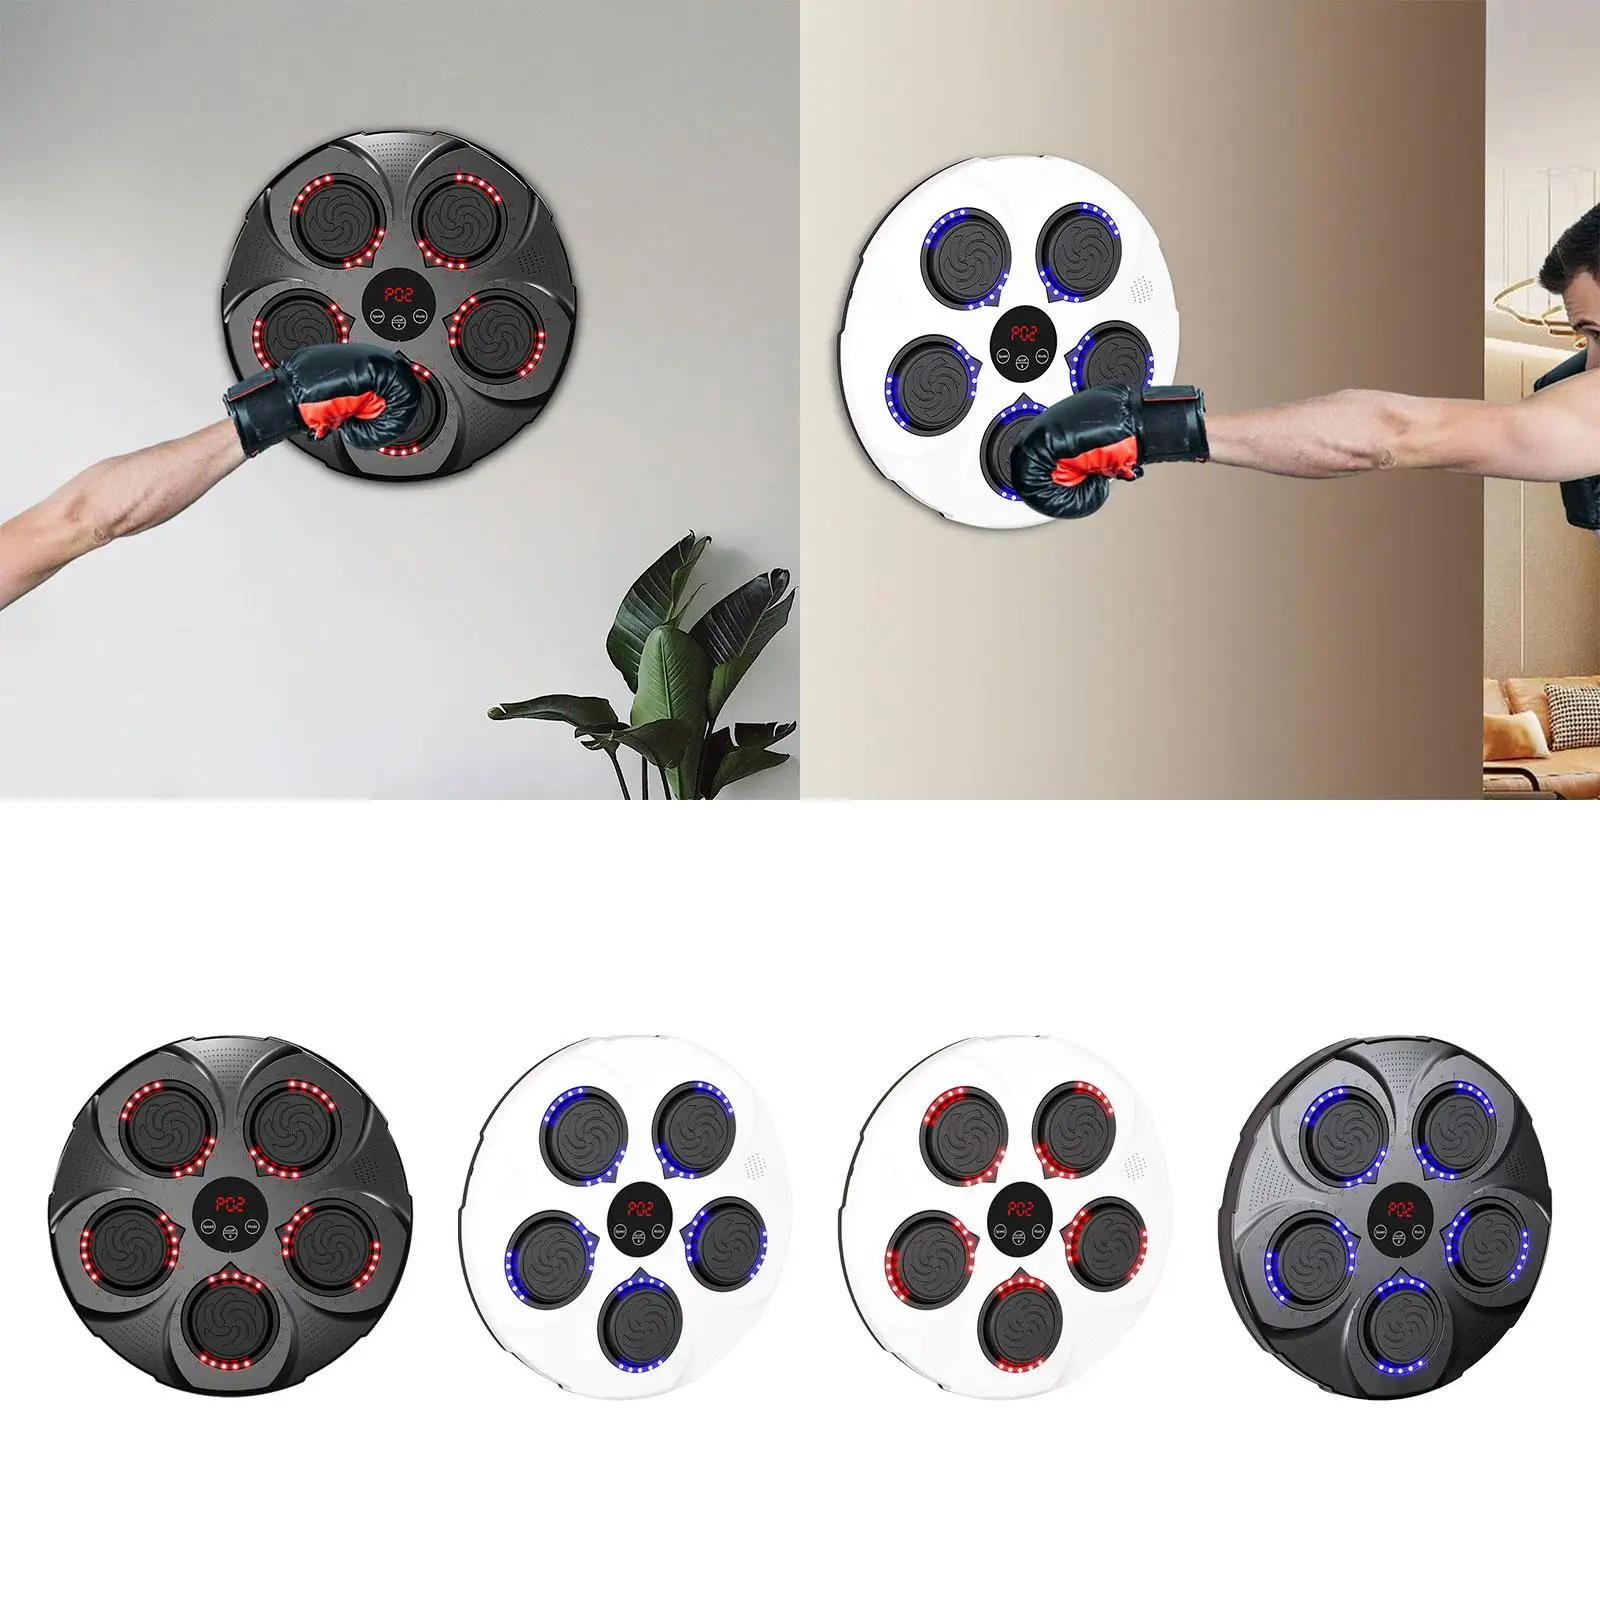 Smart Music Boxing Machine Punch Force Tester Sports Musical Target Boxing Equipment Improves Agility Response Coordination